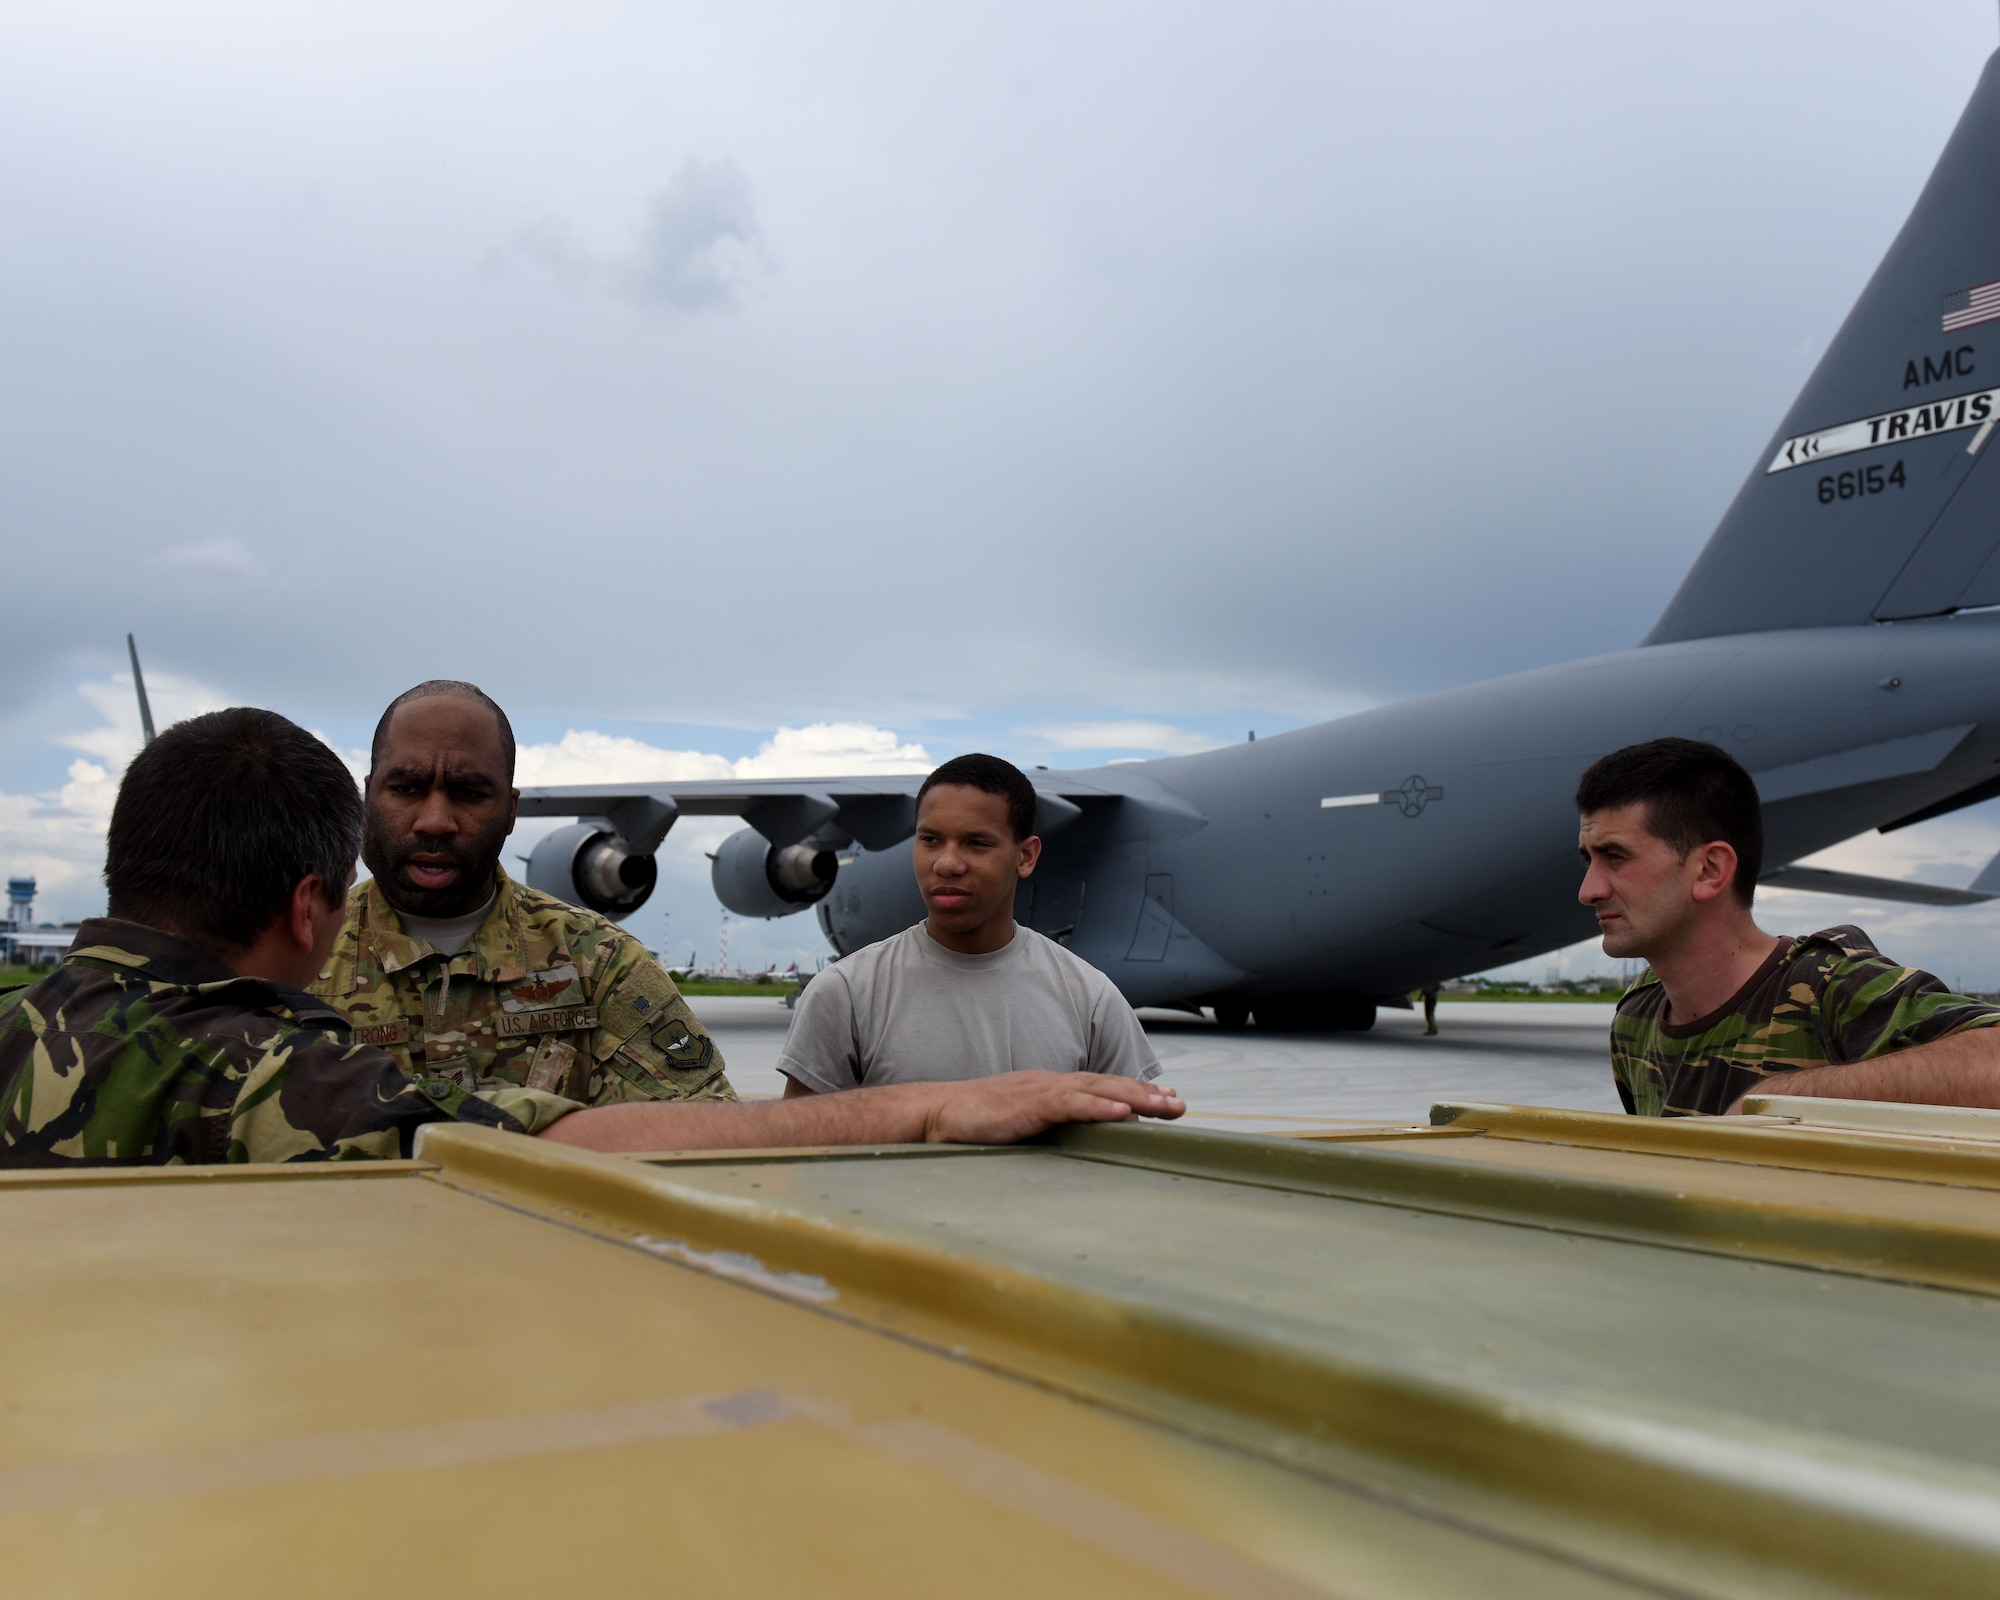 U.S. Air Force Staff Sgt. James Armstrong and Airman 1st Class Alan Collier, both center, 21st Airlift Squadron loadmasters, talk with Romanian armed forces personnel about C-17 Globemaster III aircraft loading requirements May 25, 2019, in Bucharest, Romania. With more than 730 personnel deployed to Afghanistan, Romania is the sixth largest contributor of troops to NATO’s Resolute Support train, advise and assist mission. (U.S. Air Force photo by 2nd Lt. R. Michael Longoria)